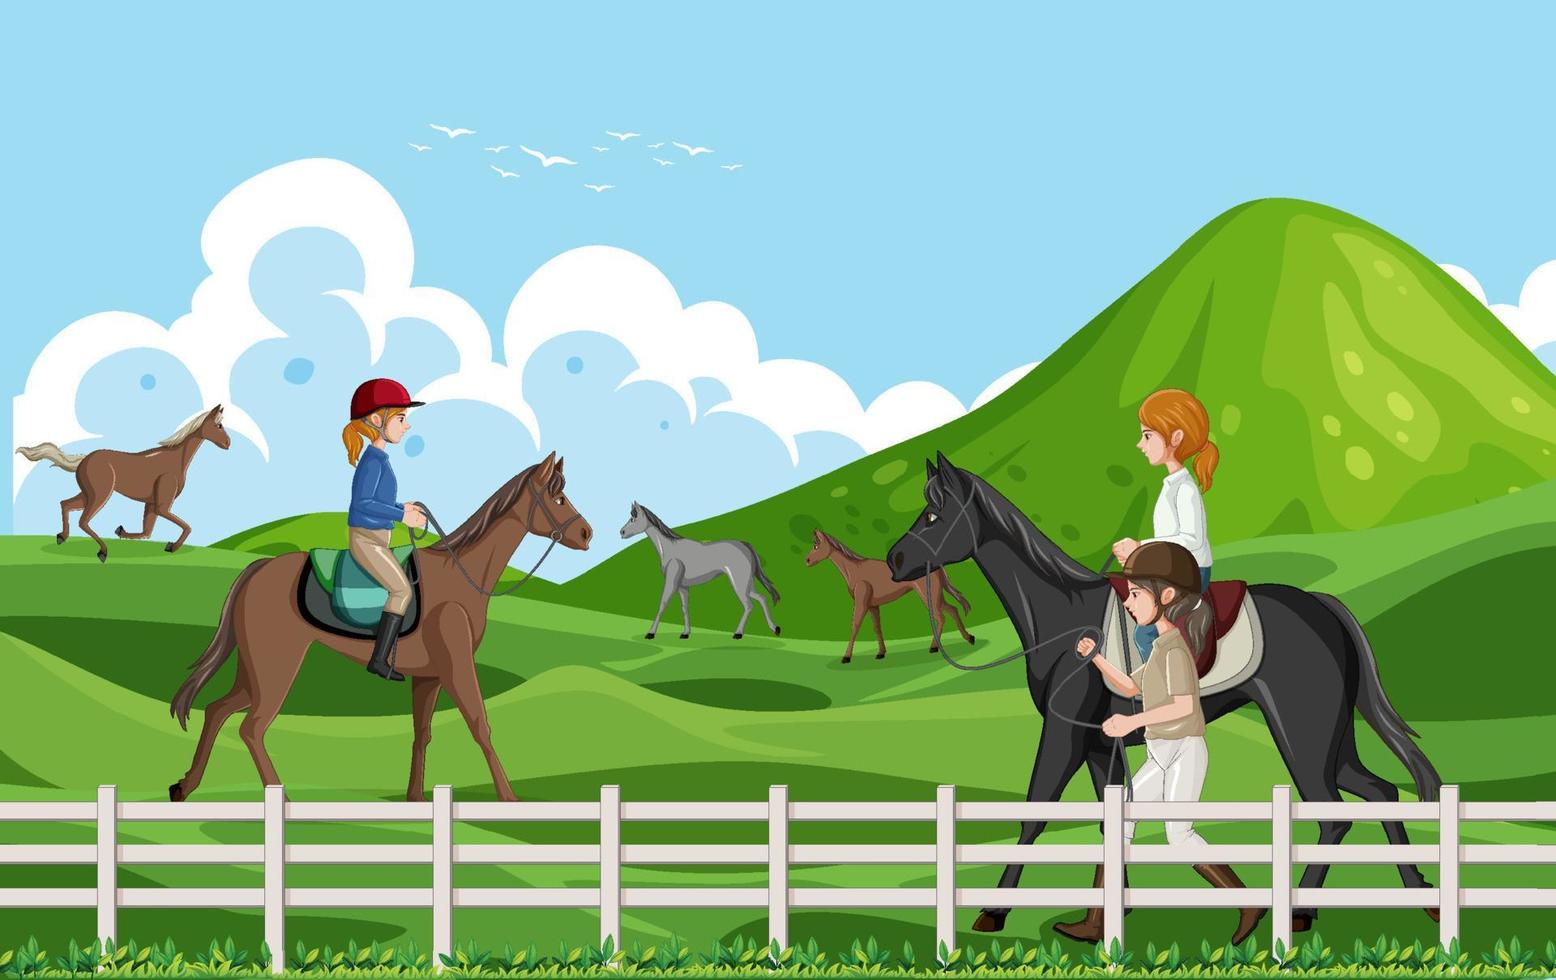 Outdoor scene with equestrian on horse vector